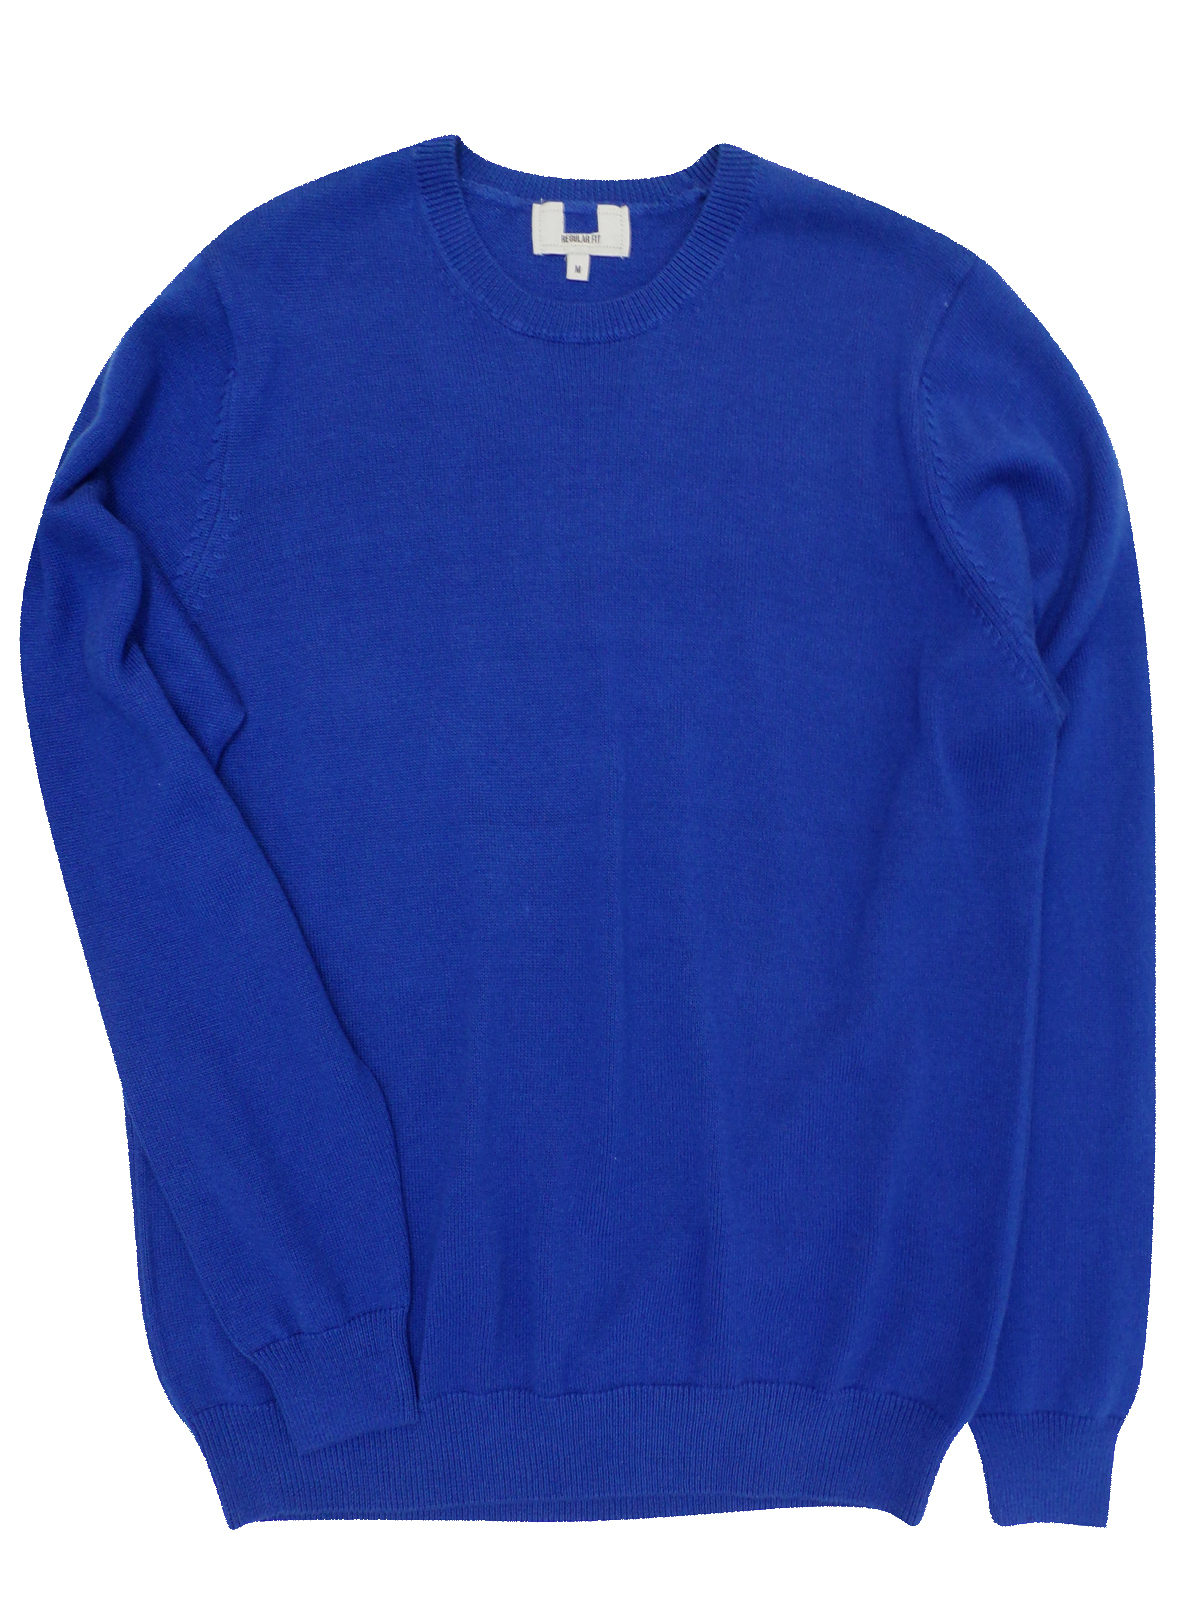 Marks and Spencer - - M&5 ROYAL-BLUE Pure Cotton Long Sleeve Jumper ...